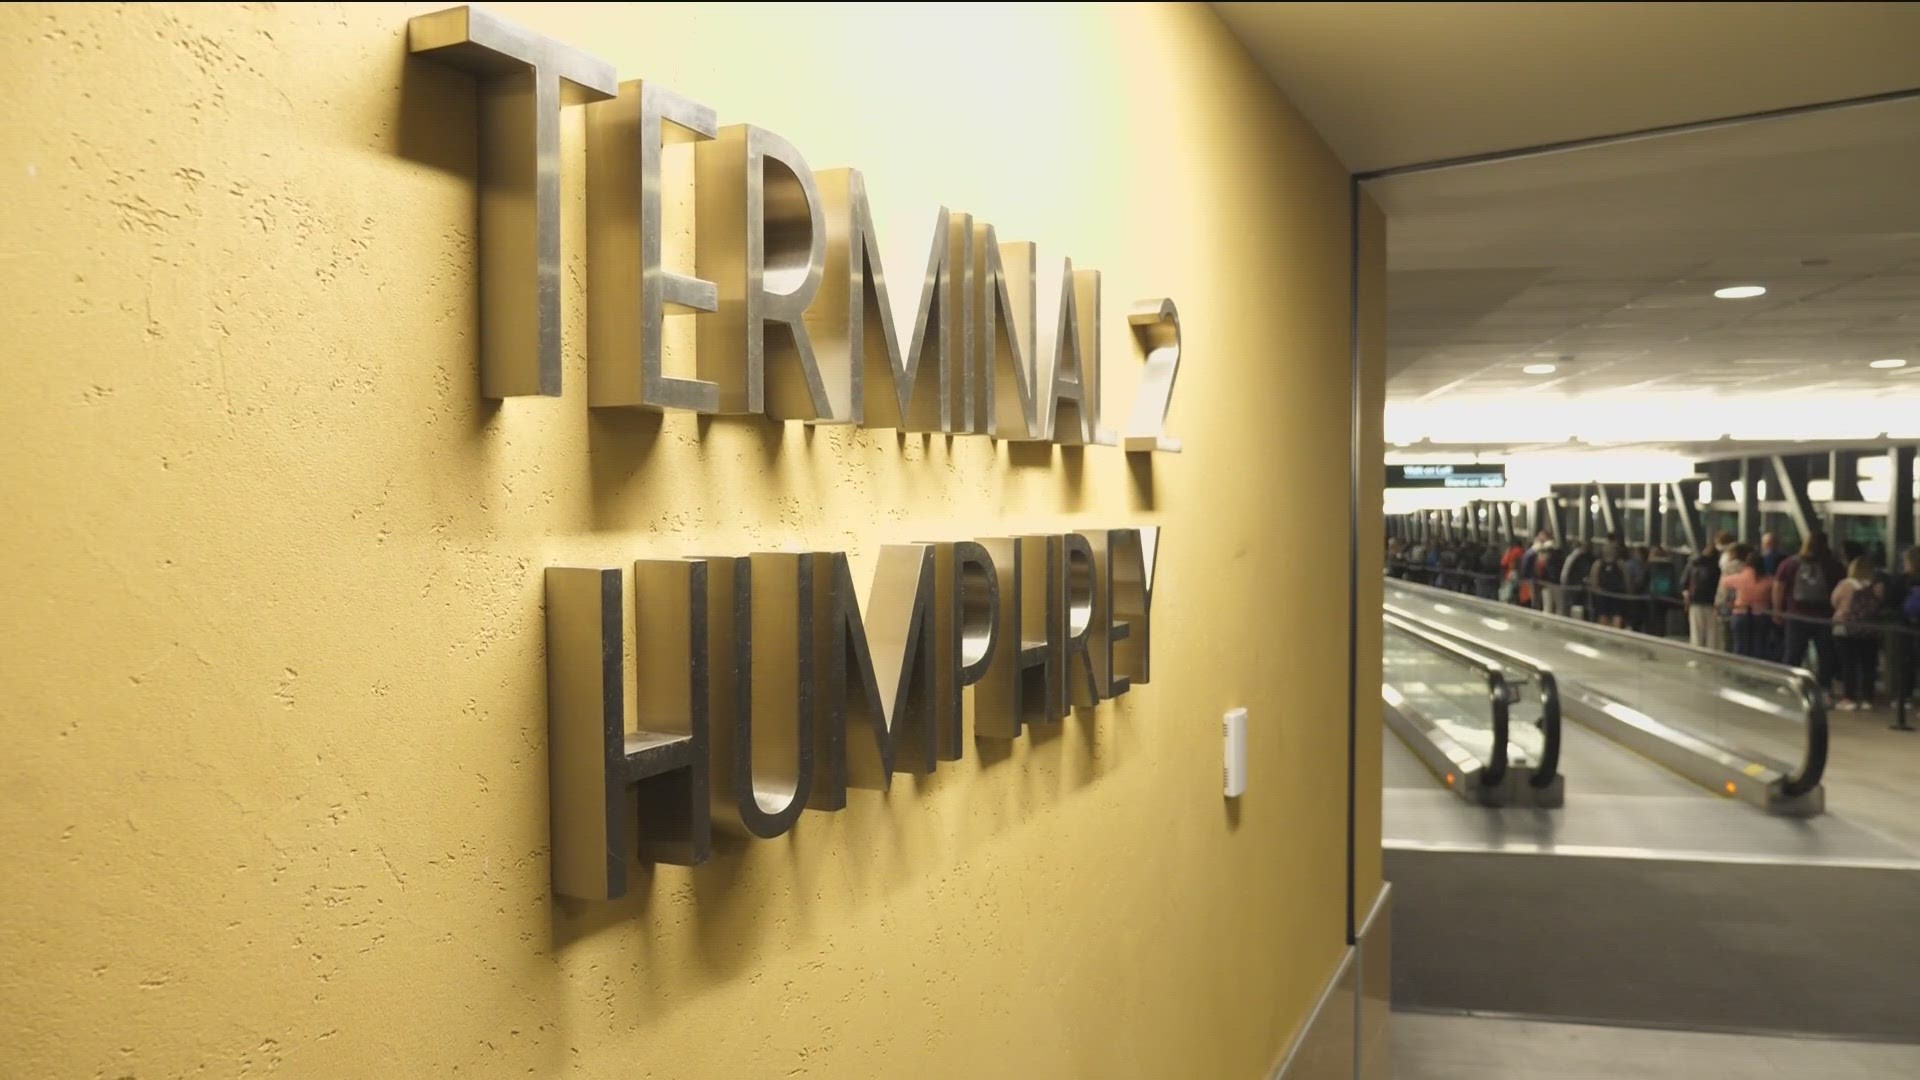 There's some big changes coming to Terminal 2, thanks to money from the FAA's Airport Terminals Program.